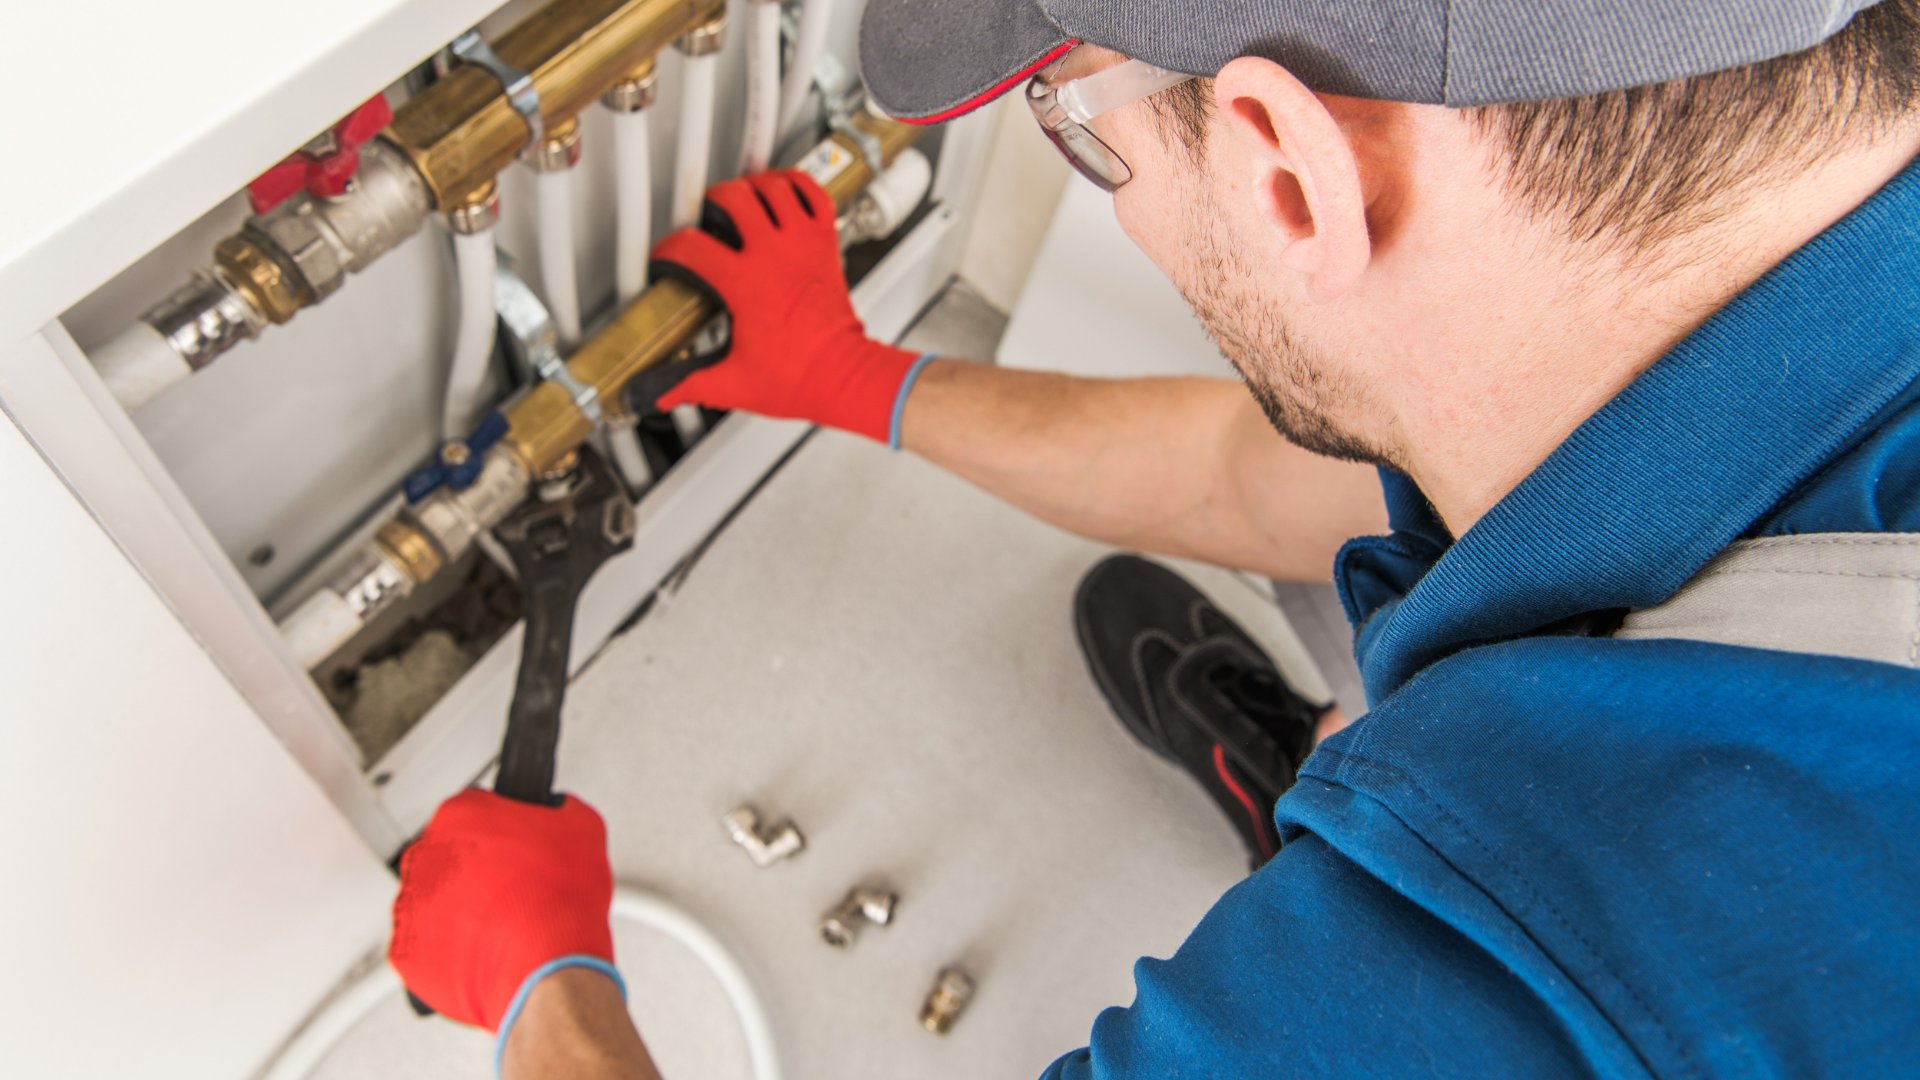 Emergency Plumbing Services: When to Call a 24/7 Plumber